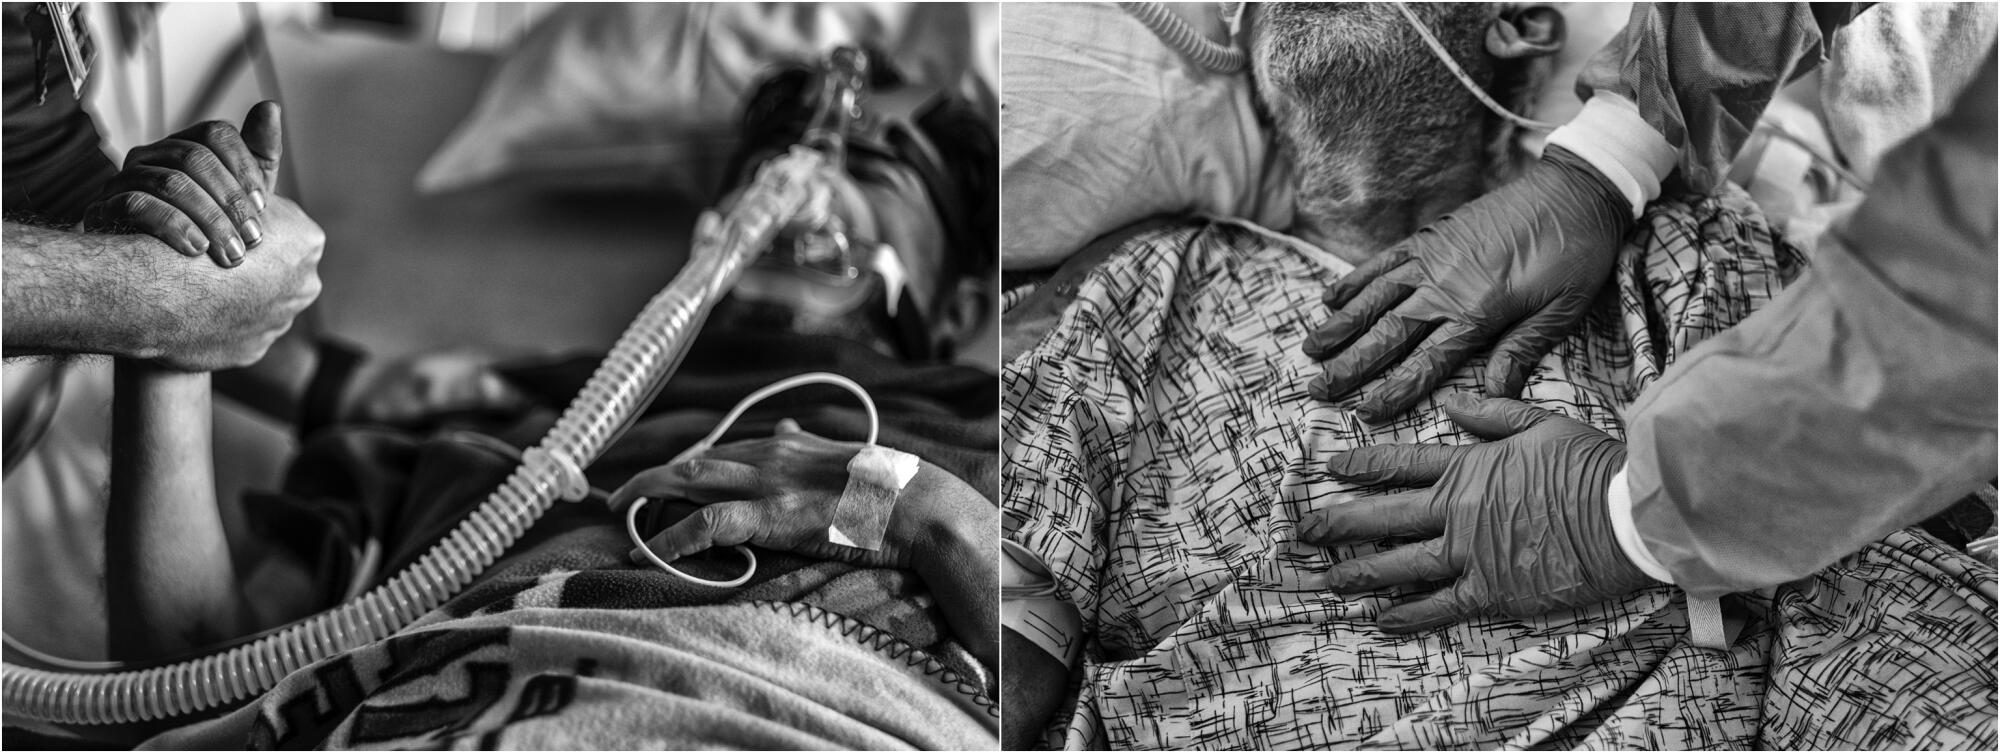 Left: A patient's hand is held by Chaplain Kevin. Right: The chaplain's hands on a patient's chest.